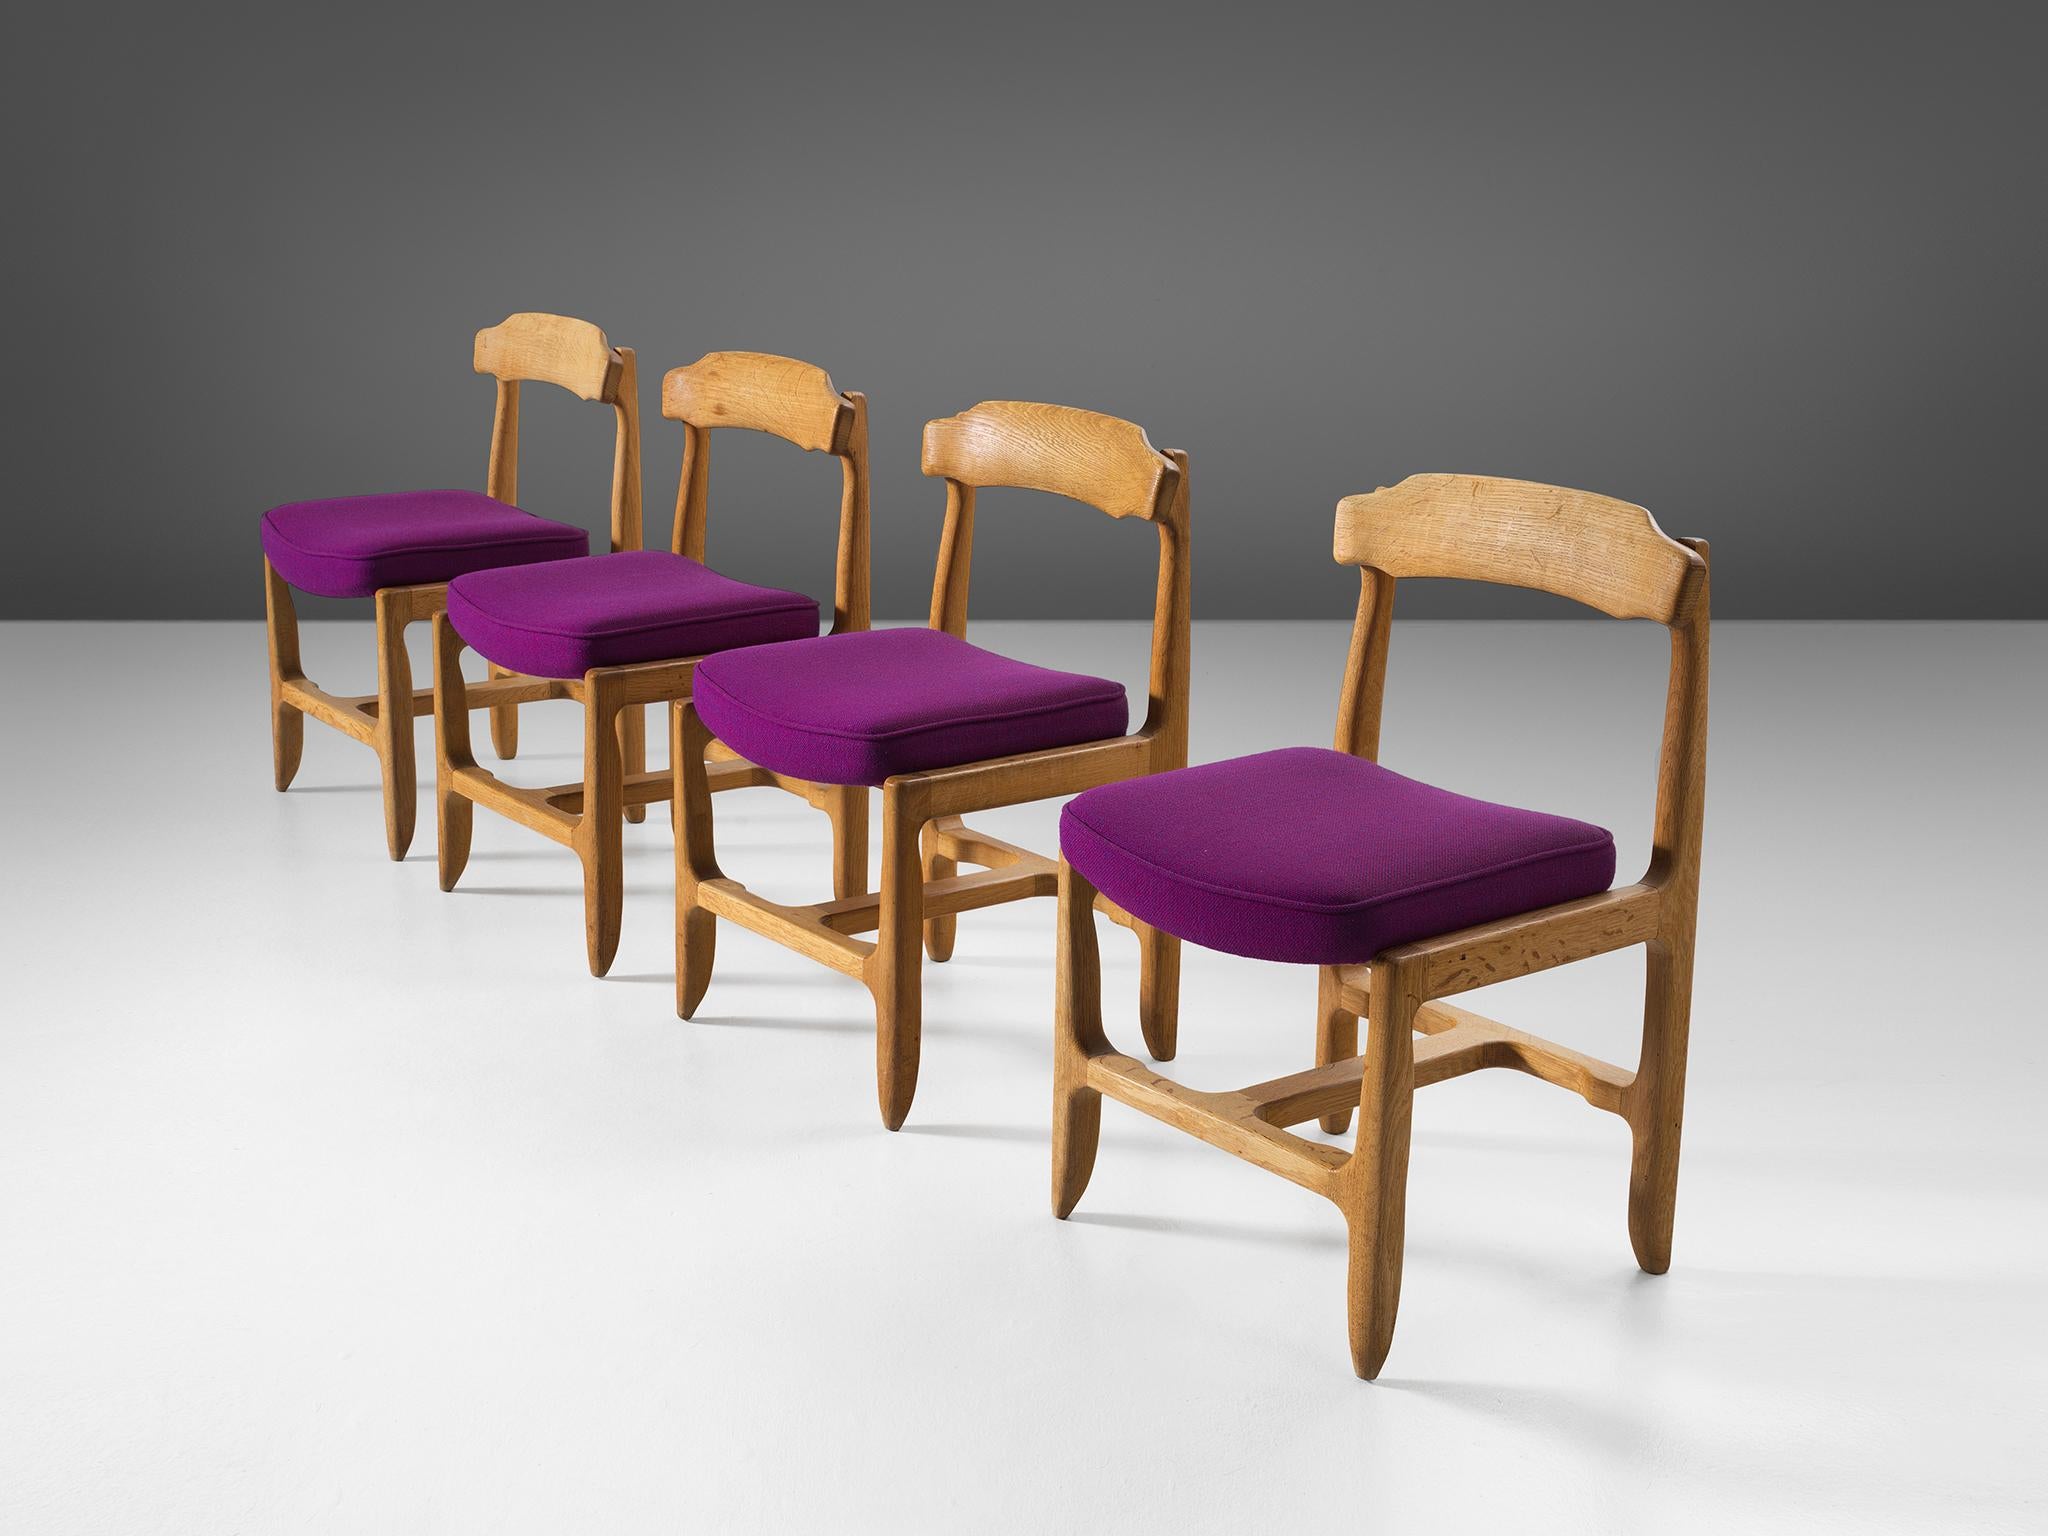 Dining chairs, solid oak and fabric, 1960s.

These distinctive chair in beautifully patinated oak is by the French designer duo Jacques Chambron (1914-2001) and Robert Guillerme, (1913-1990). These dining chair shows organic, tender lines almost